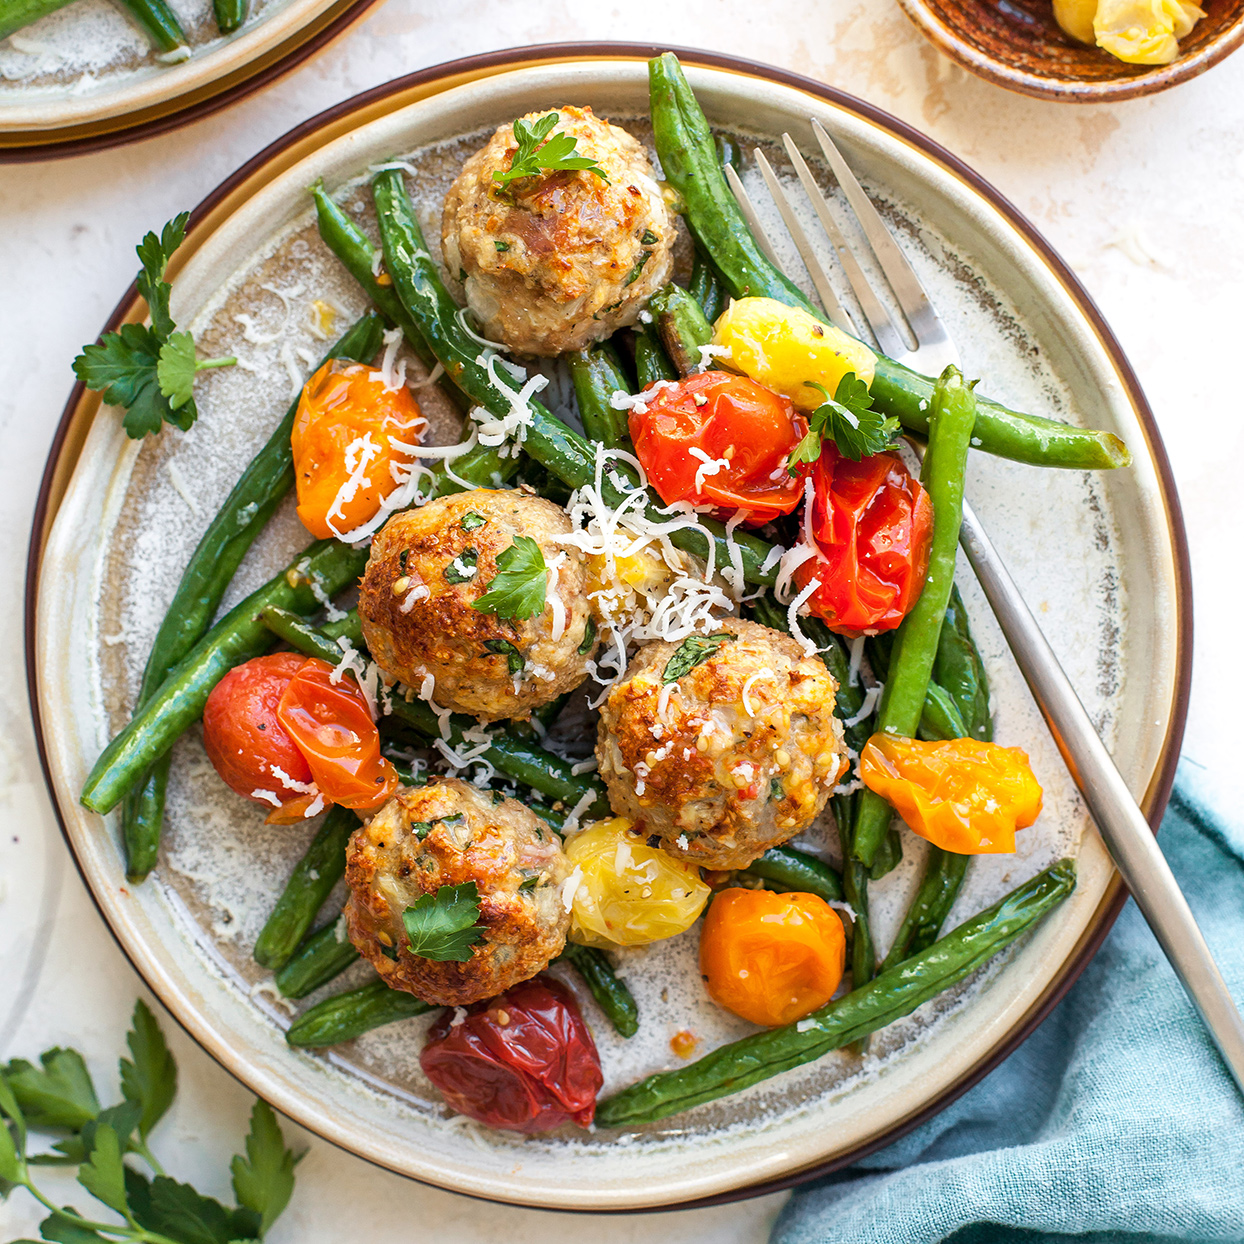 <p>The flavor of the turkey meatballs is enhanced by the Asiago and prosciutto. We love keeping this turkey meatball recipe on hand for meal prep, since meatballs can be used in sandwiches, salads, pasta and more.</p>
                          